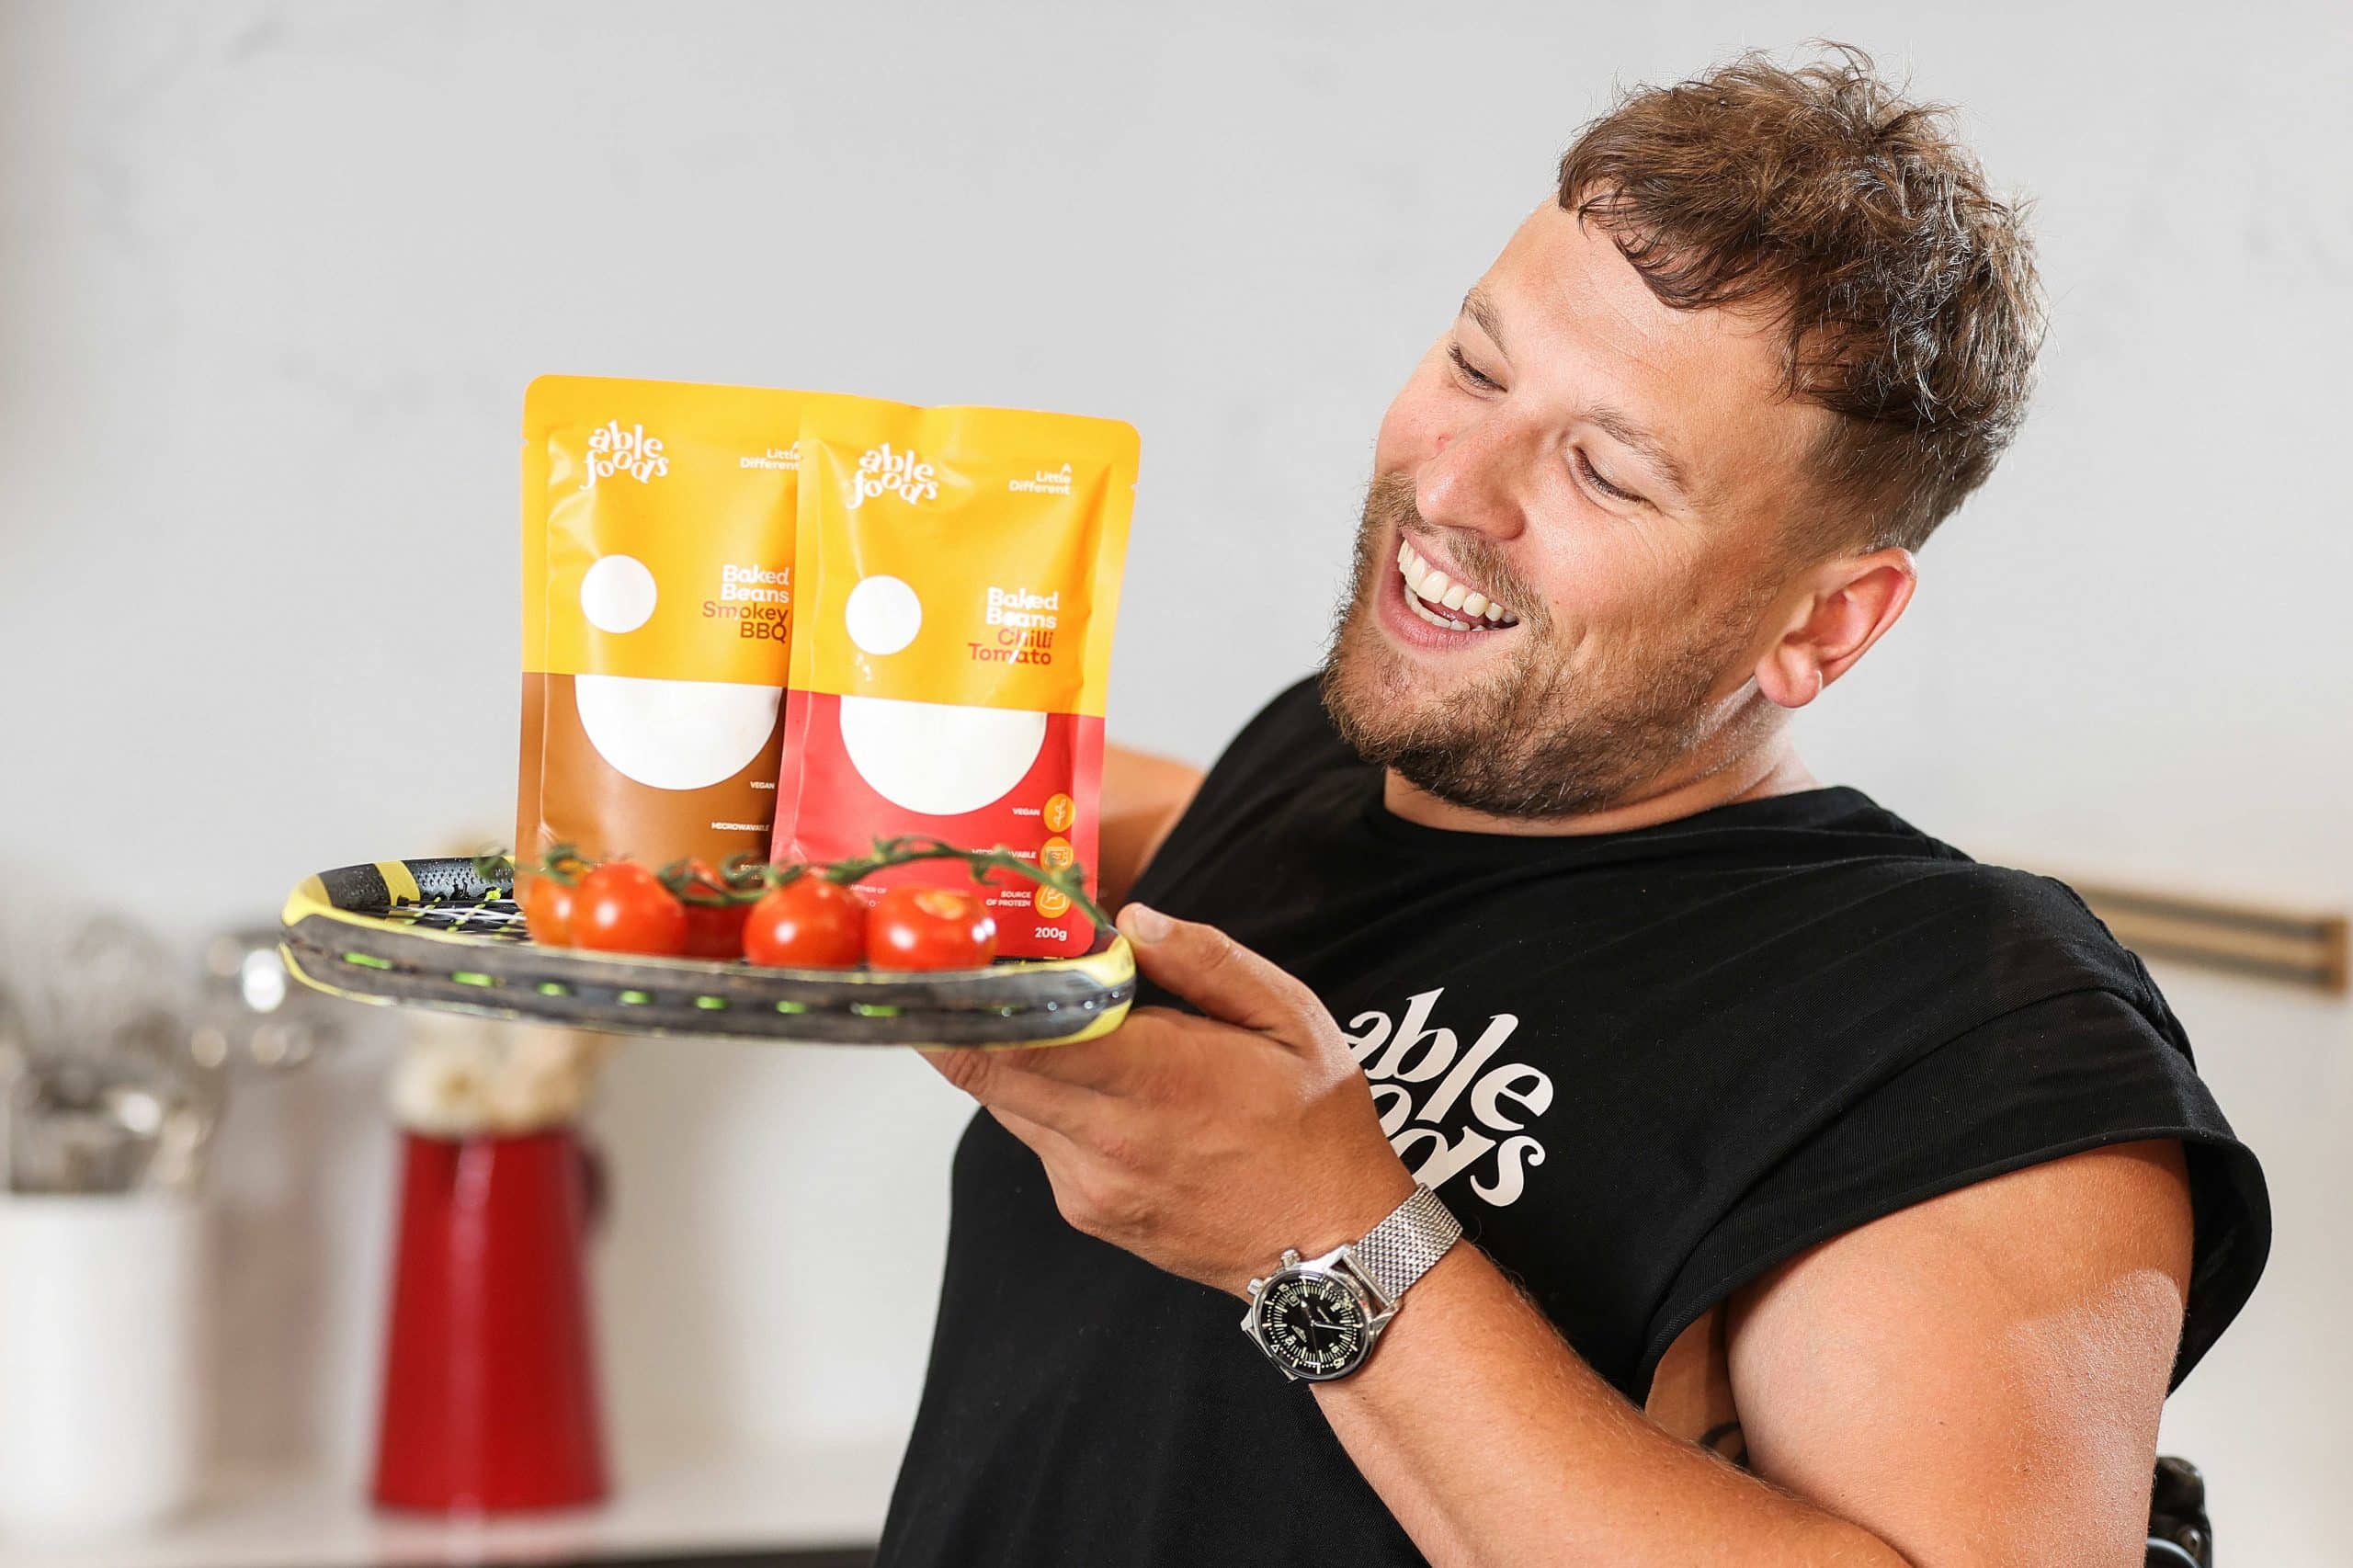 Dylan Alcott serves up healthy tasty meals from Able Foods.